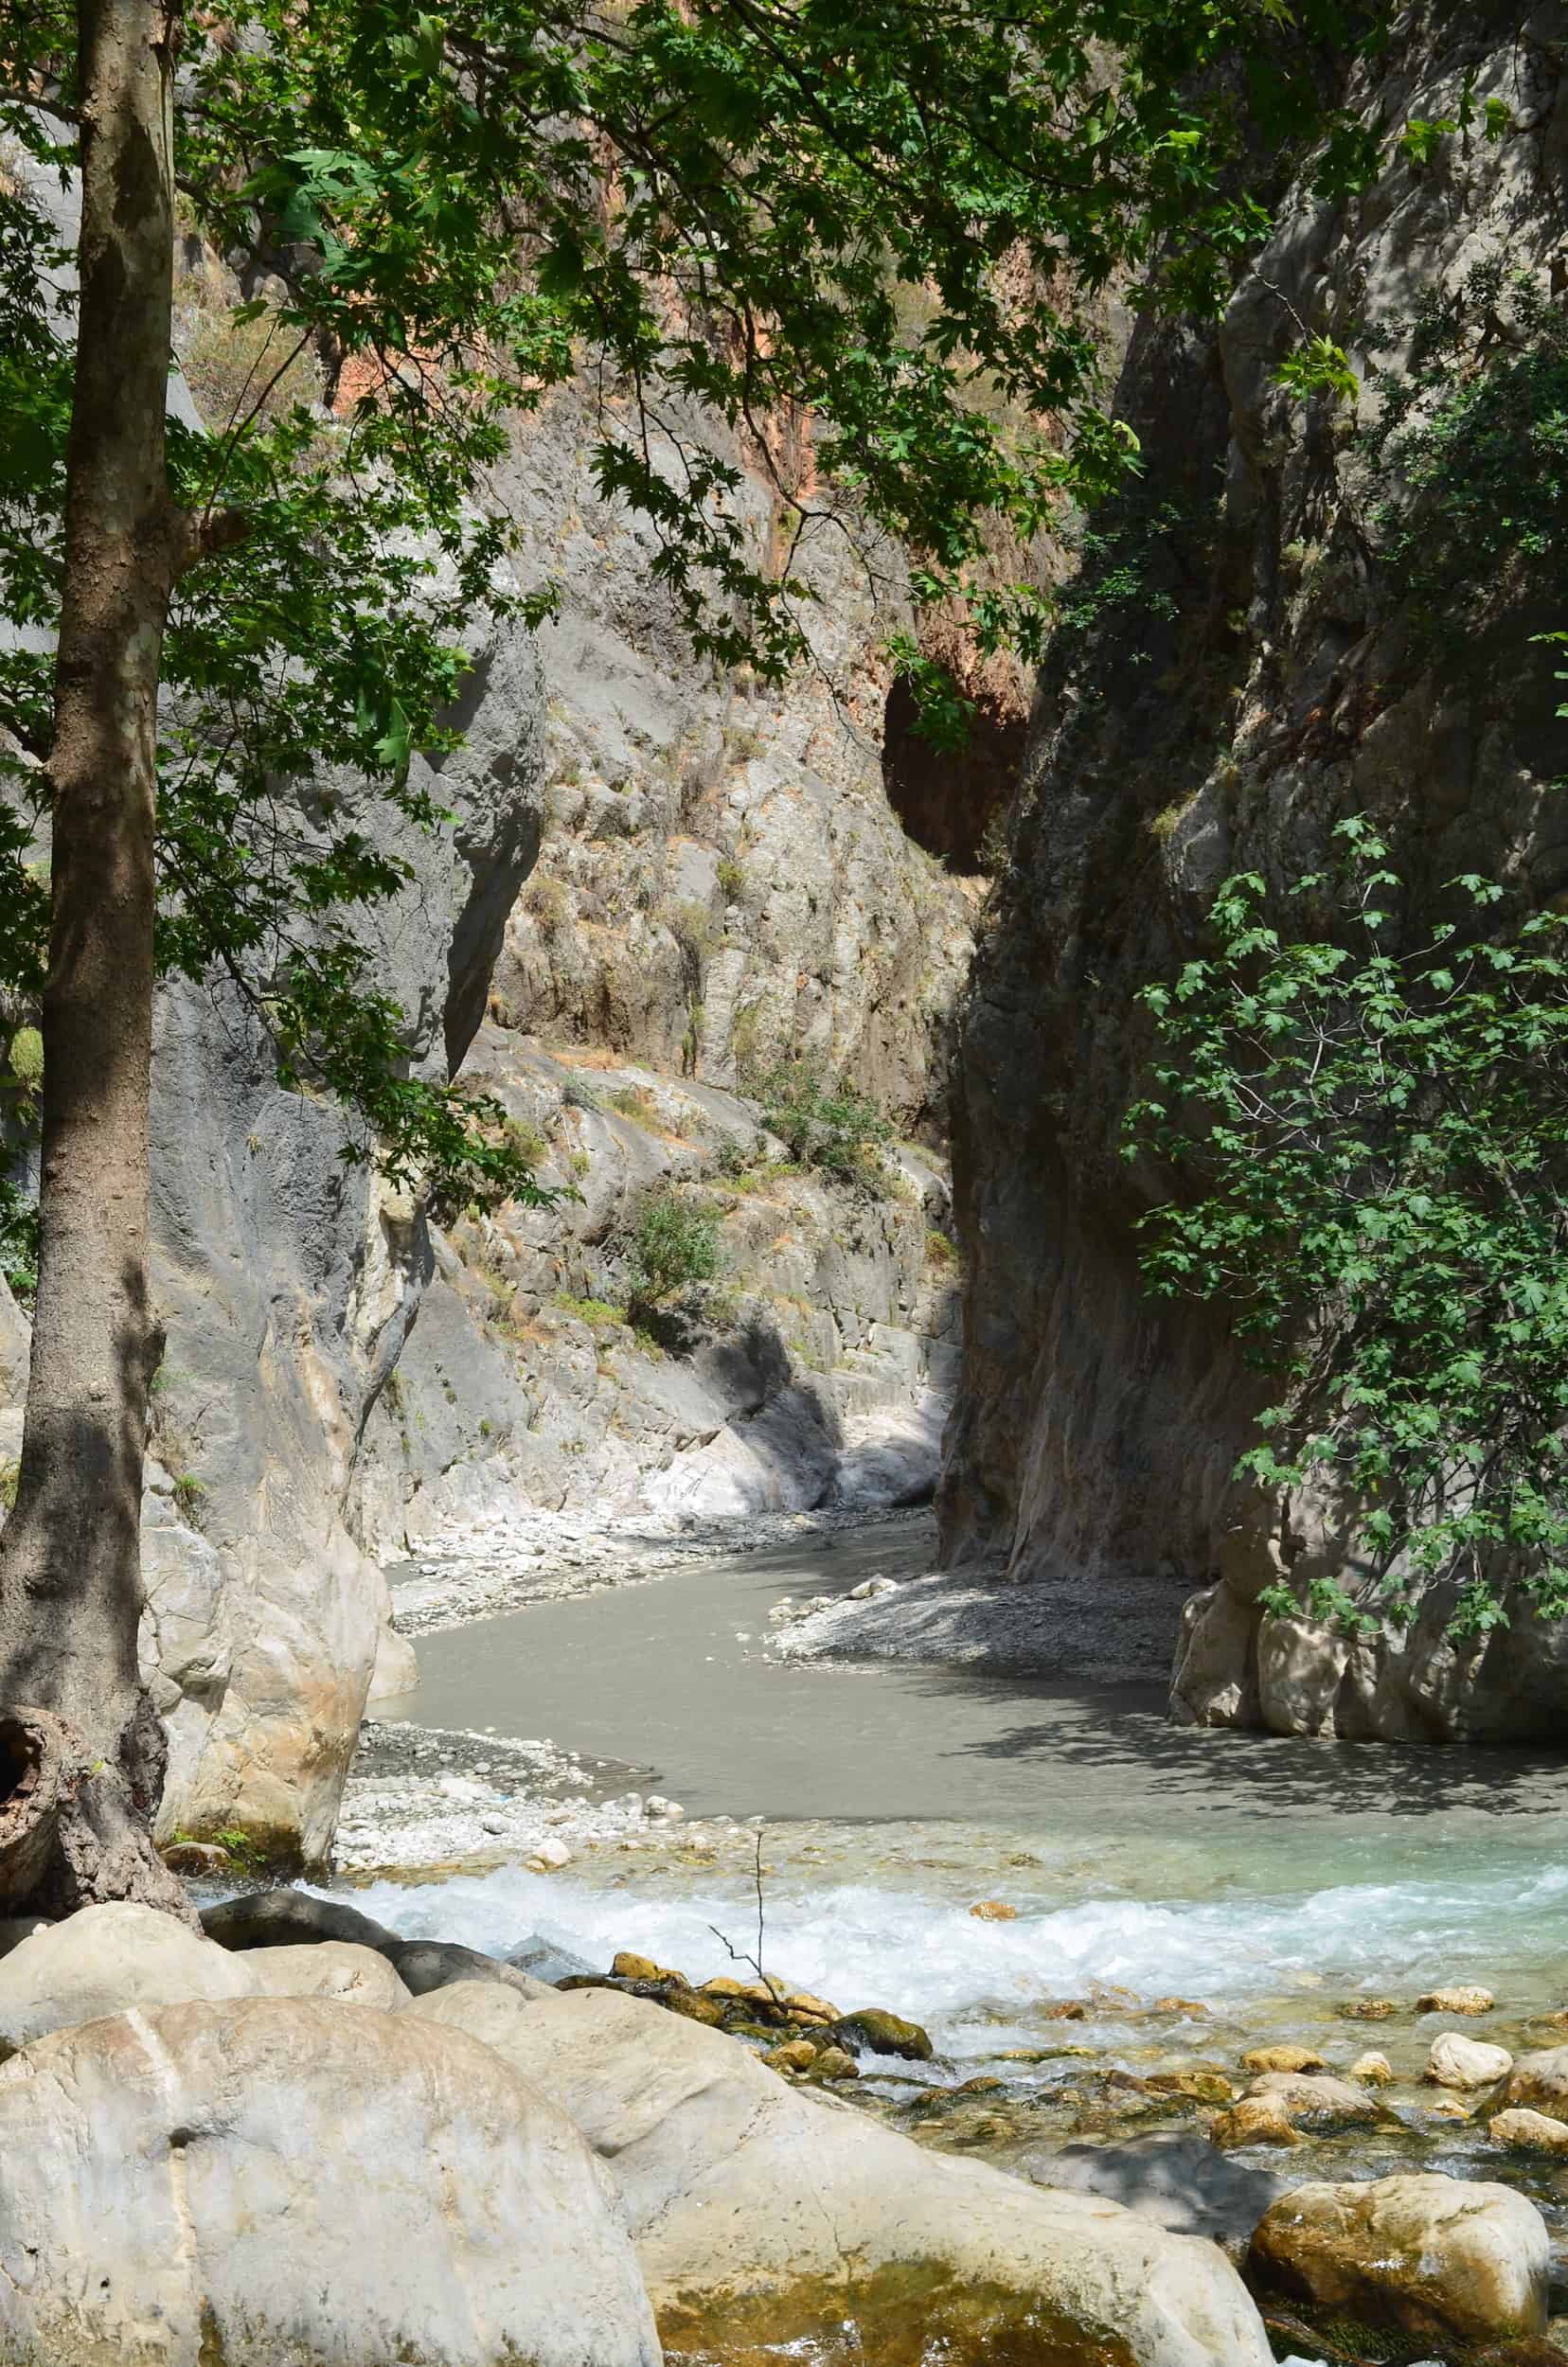 This is as close as I could get to the trail into Saklıkent Gorge